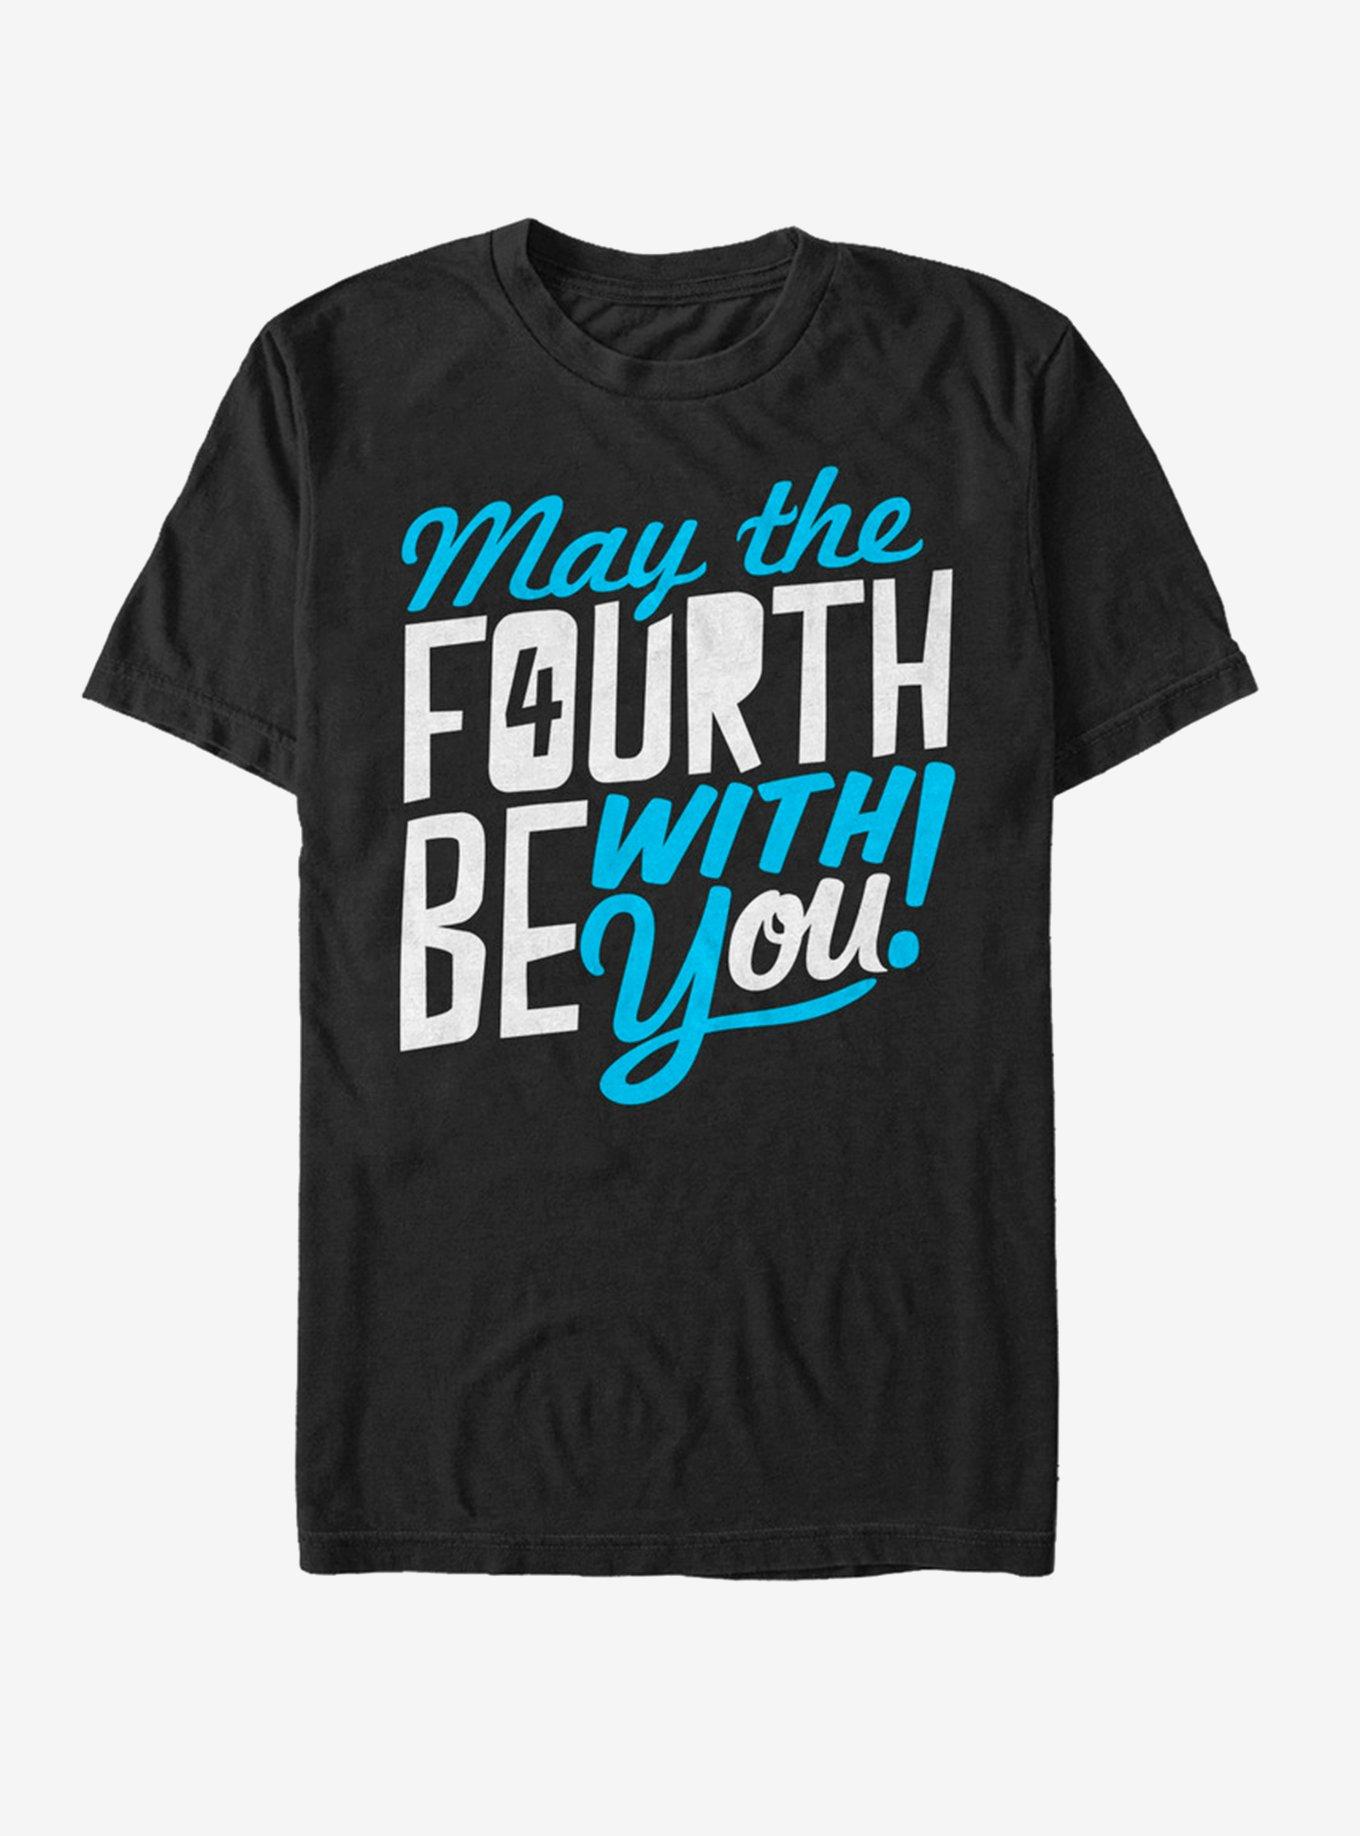 Star Wars May the Fourth Be With You T-Shirt, BLACK, hi-res